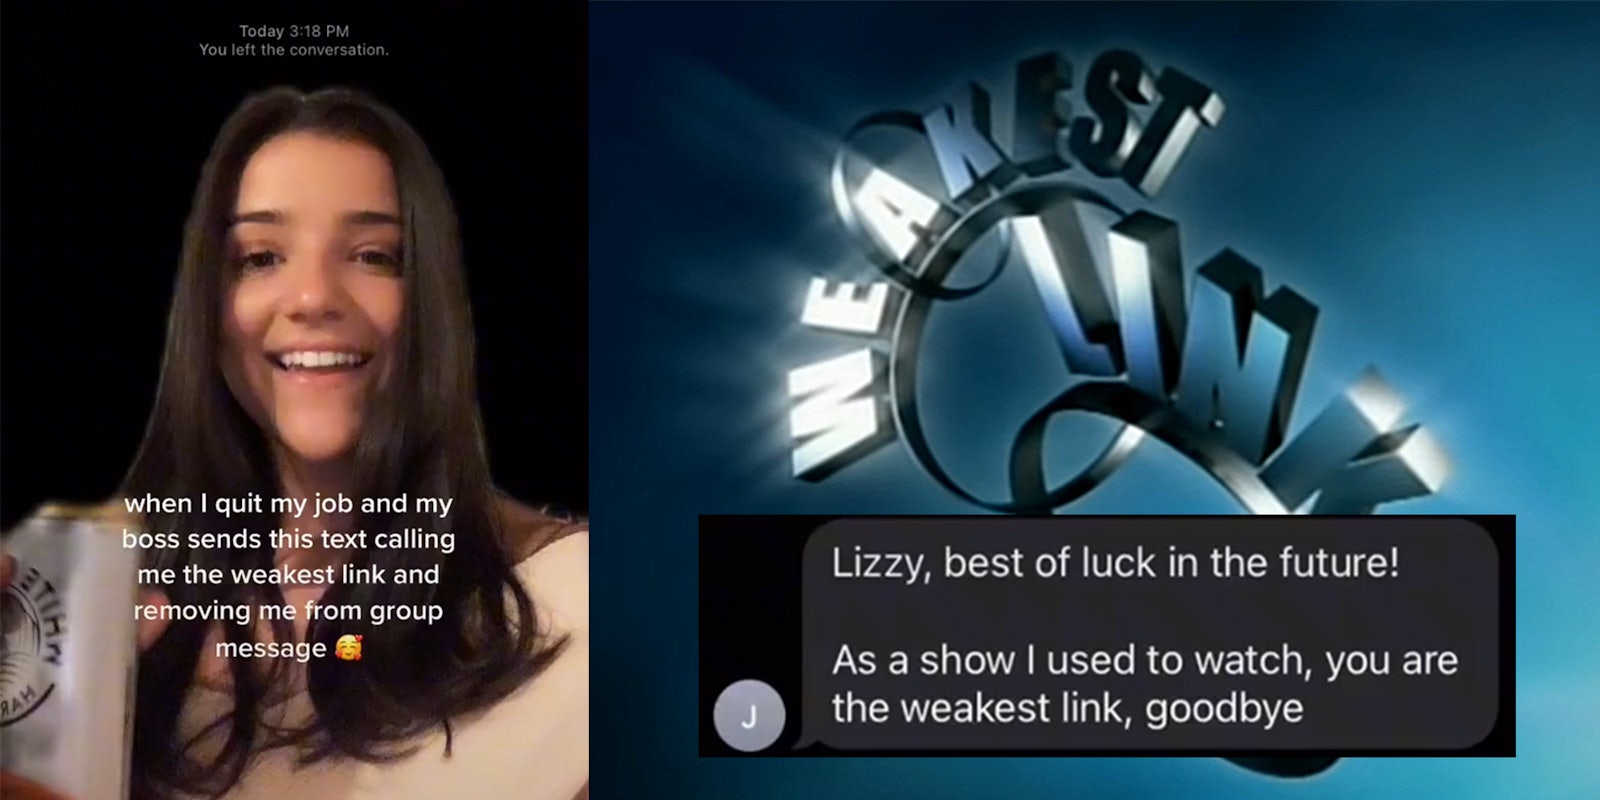 young woman with caption 'when I quit my job and my boss sends this text calling me the weakest link and removing me from group message (l) weakest link logo with text message 'Lizzy, best of luck in the future! As a show I used to watch, you are the weakest link, goodbye' (r)